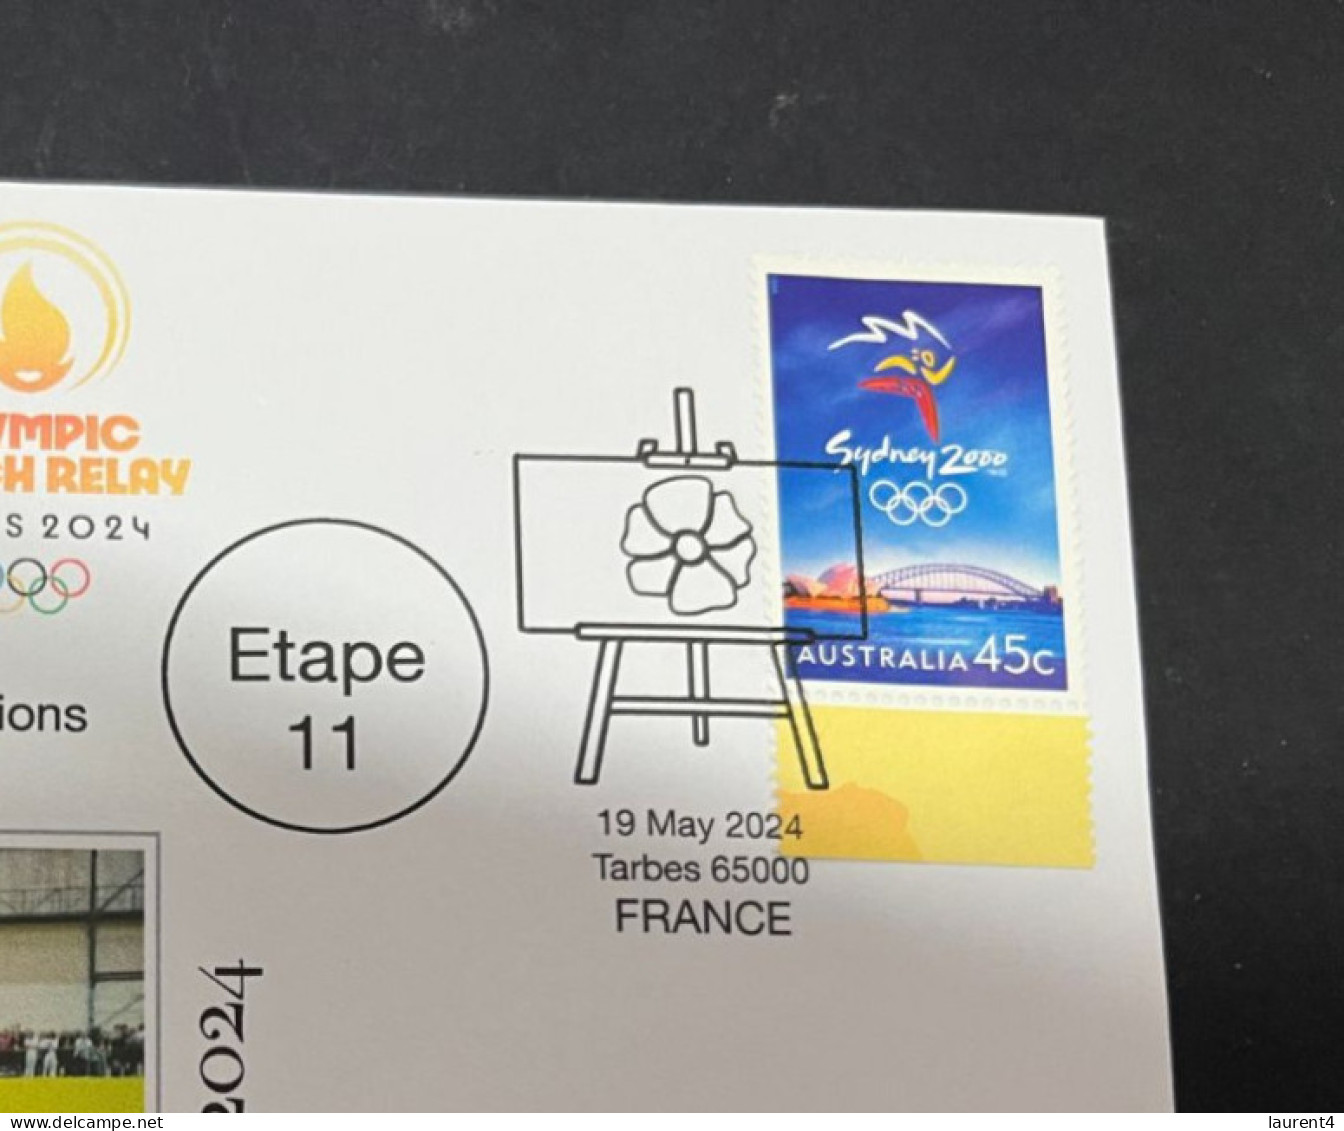 20-5-2024 (5 Z 37) Paris Olympic Games 2024 - Torch Relay (Etape 11) In Tarbes (19-5-2024) With OLYMPIC Stamp - Eté 2024 : Paris